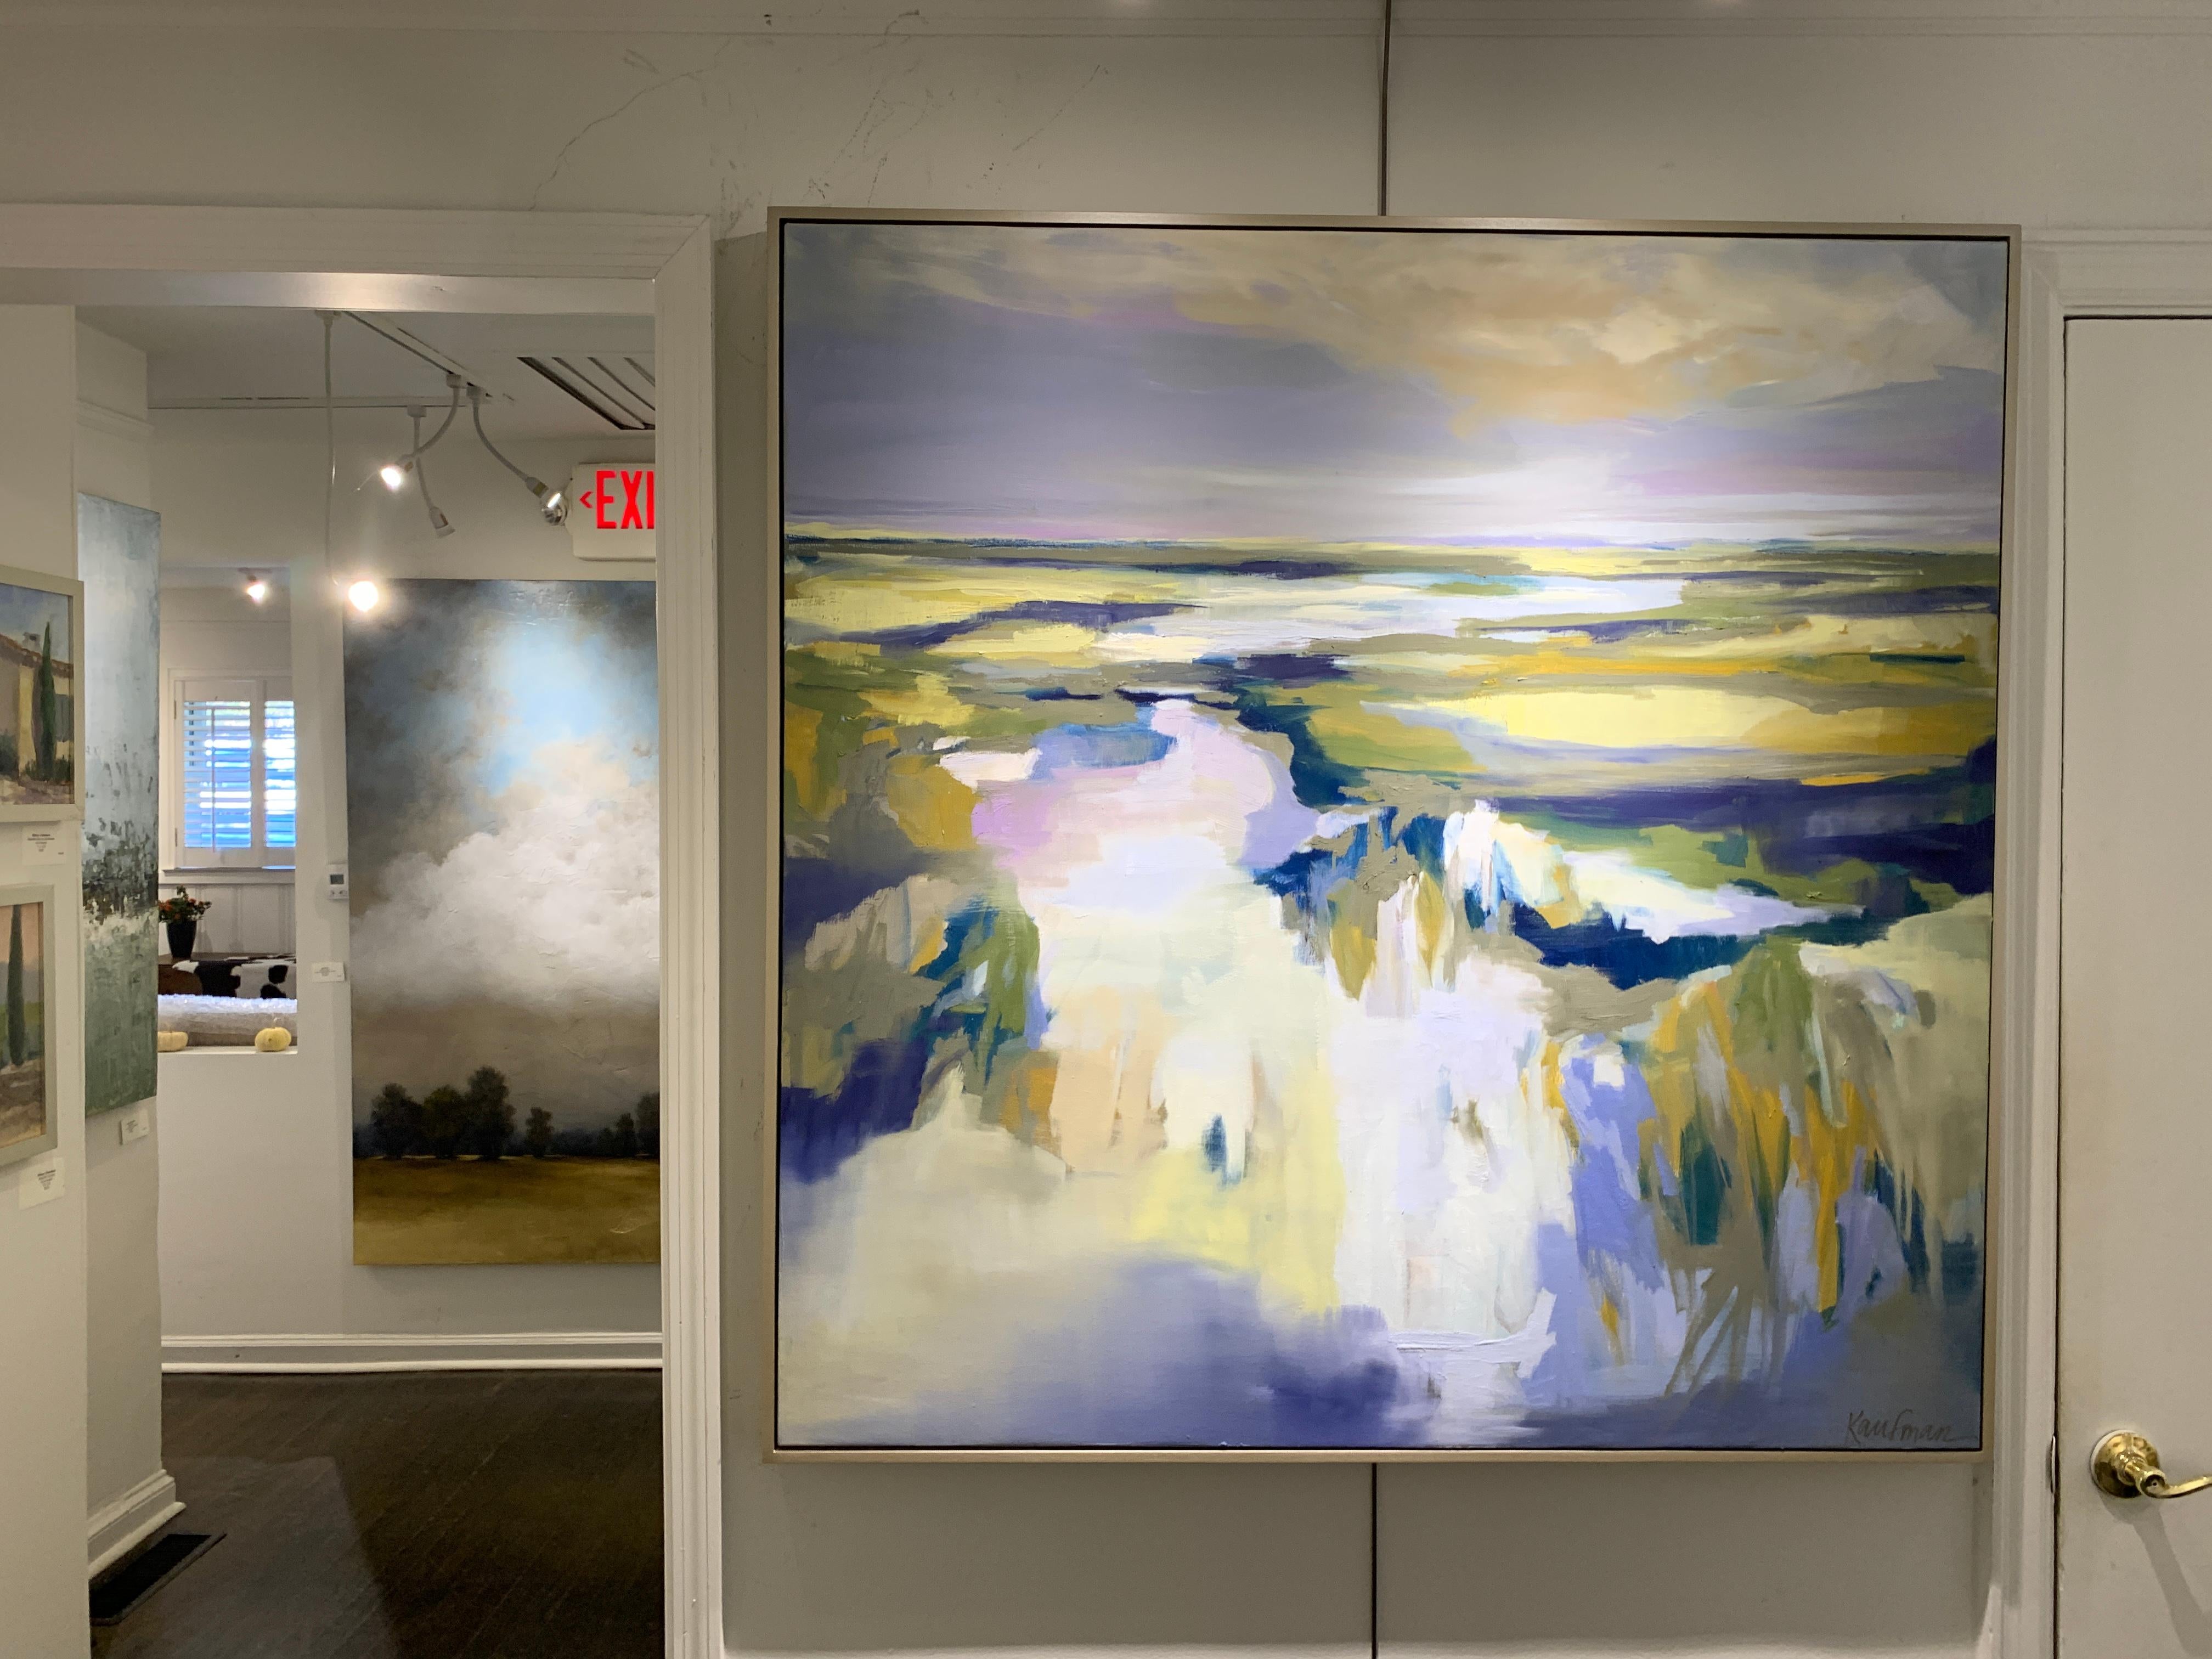 Cloud Reflection, Kelli Kaufman Large Framed Oil and Wax Landscape Painting 1